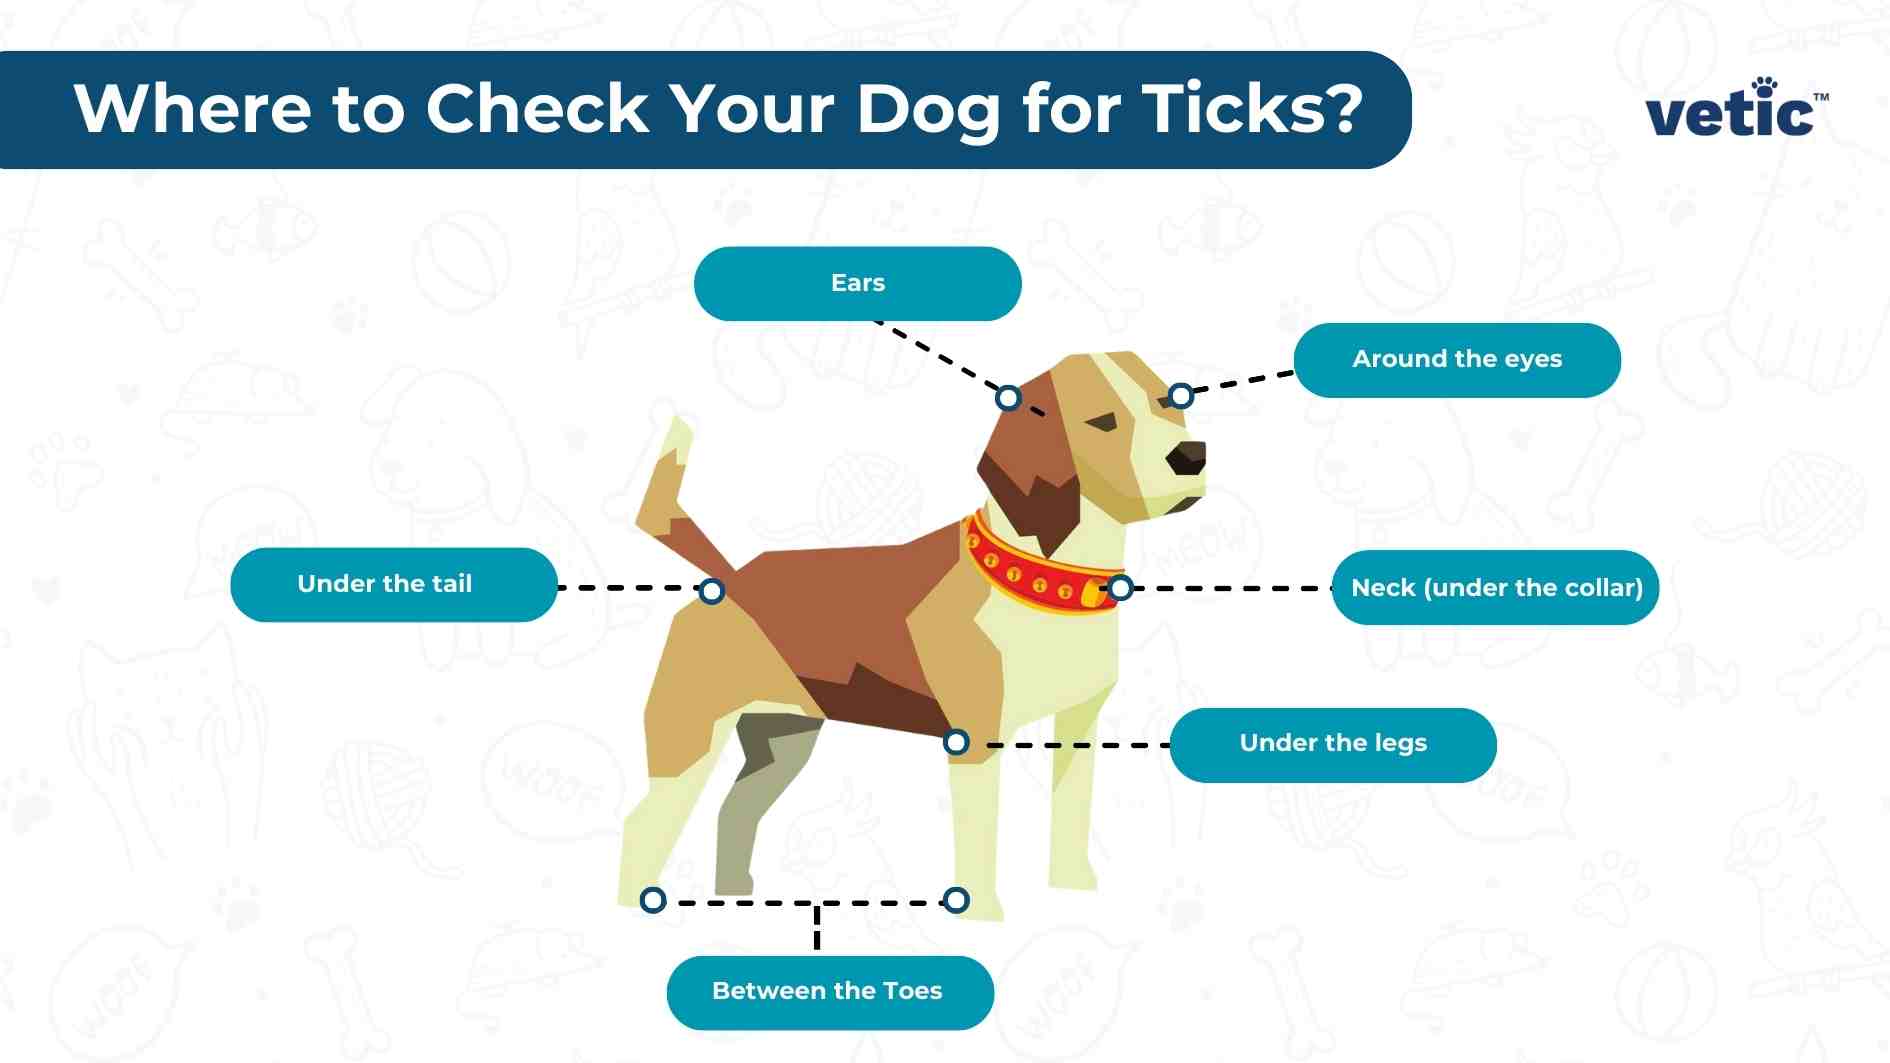 Protecting your dog from ticks entails checking your dog regularly for ticks. Here's an infographic on where to check your dog for ticks - Neck (under the collar) Around the eyes Ears Under the tail Between the Toes Under the legs